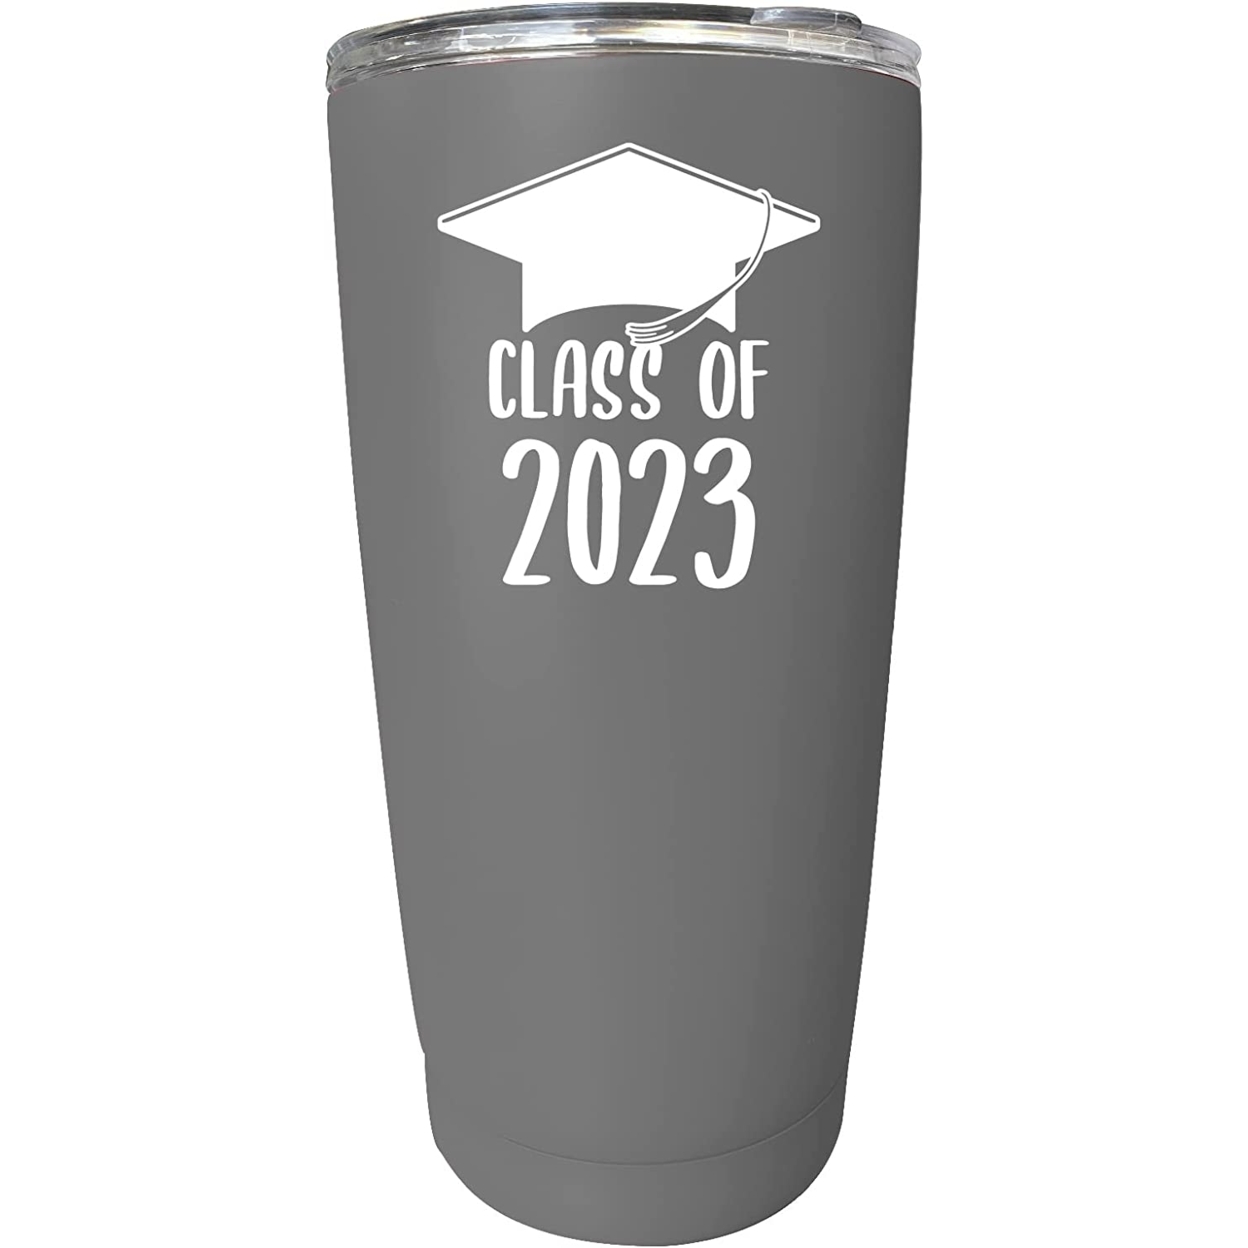 R And R Imports Class Of 2023 Graduation Senior Grad 16 Oz Stainless Steel Insulated Tumbler - Gray